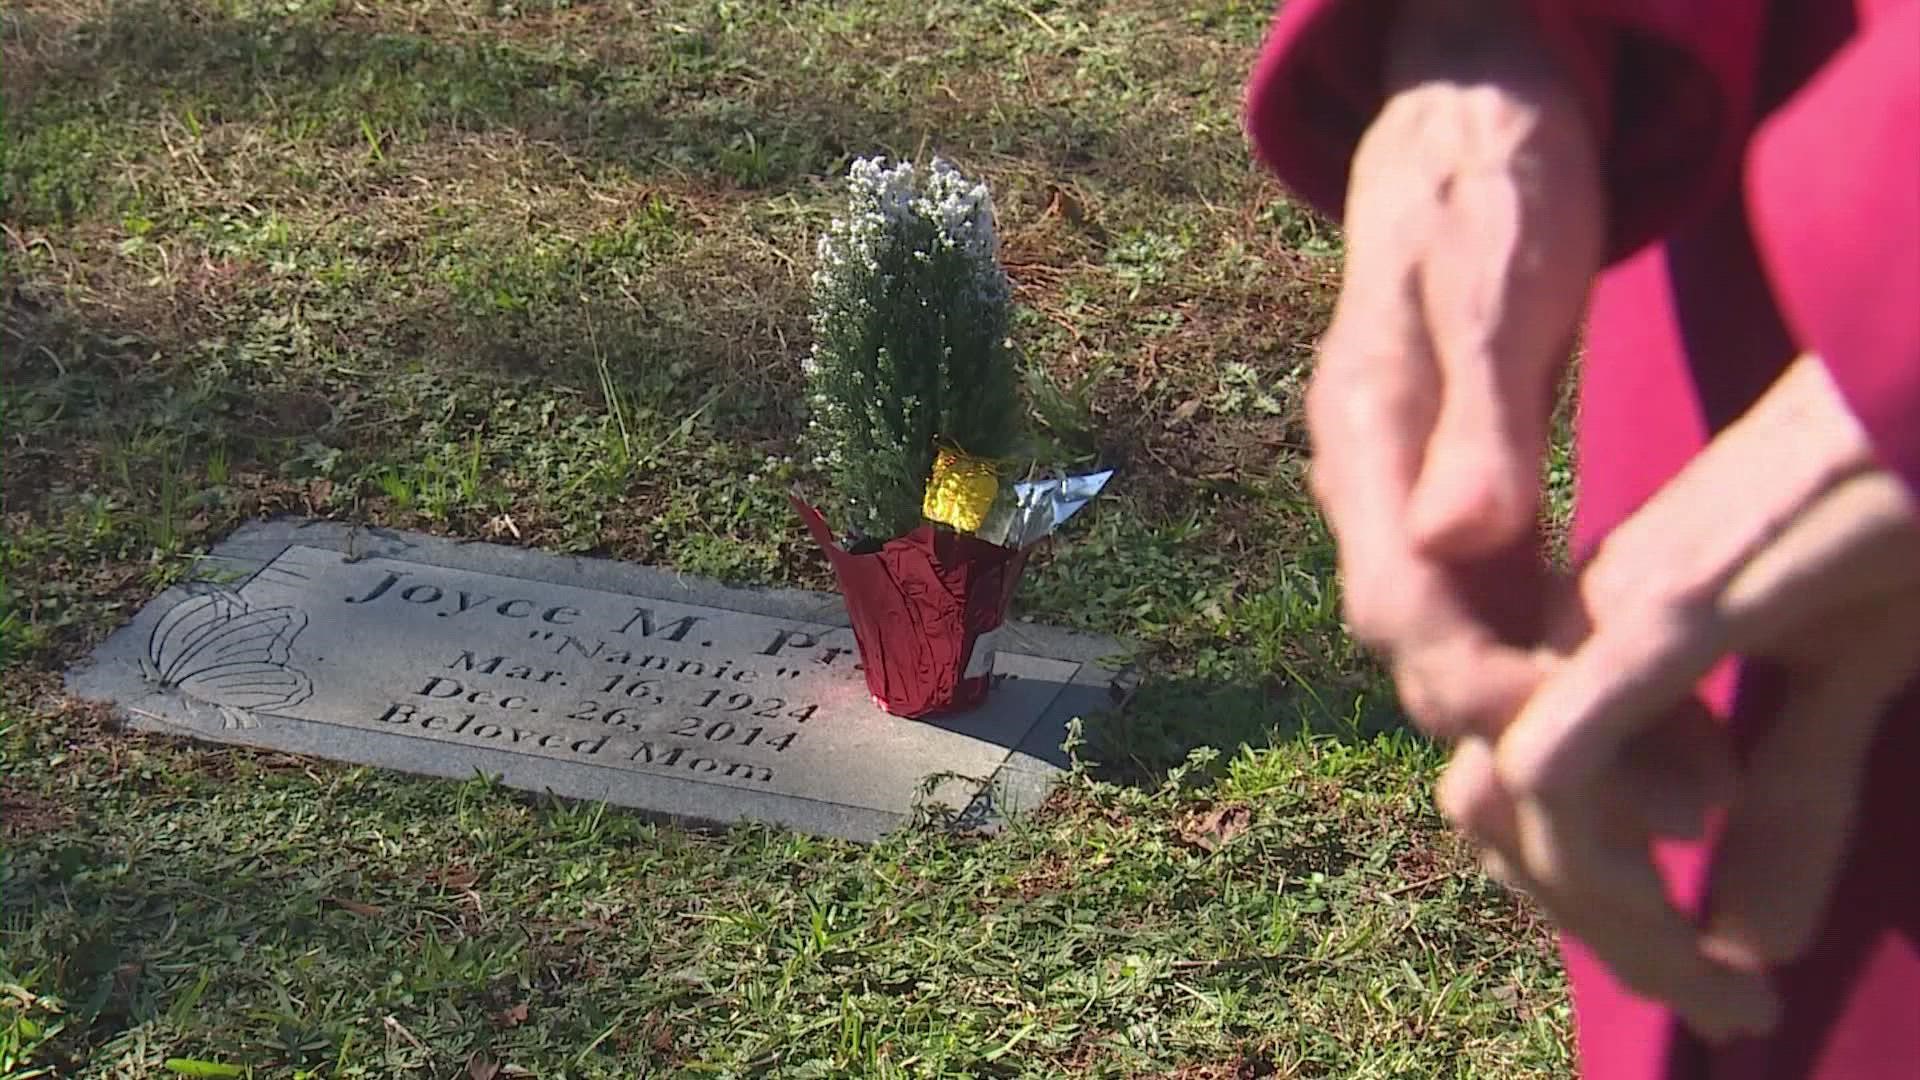 77-year-old Vannette Rummel was paying a visit to her mother "Nannie's" grave last week at Earthman Resthaven Cemetery in Spring.